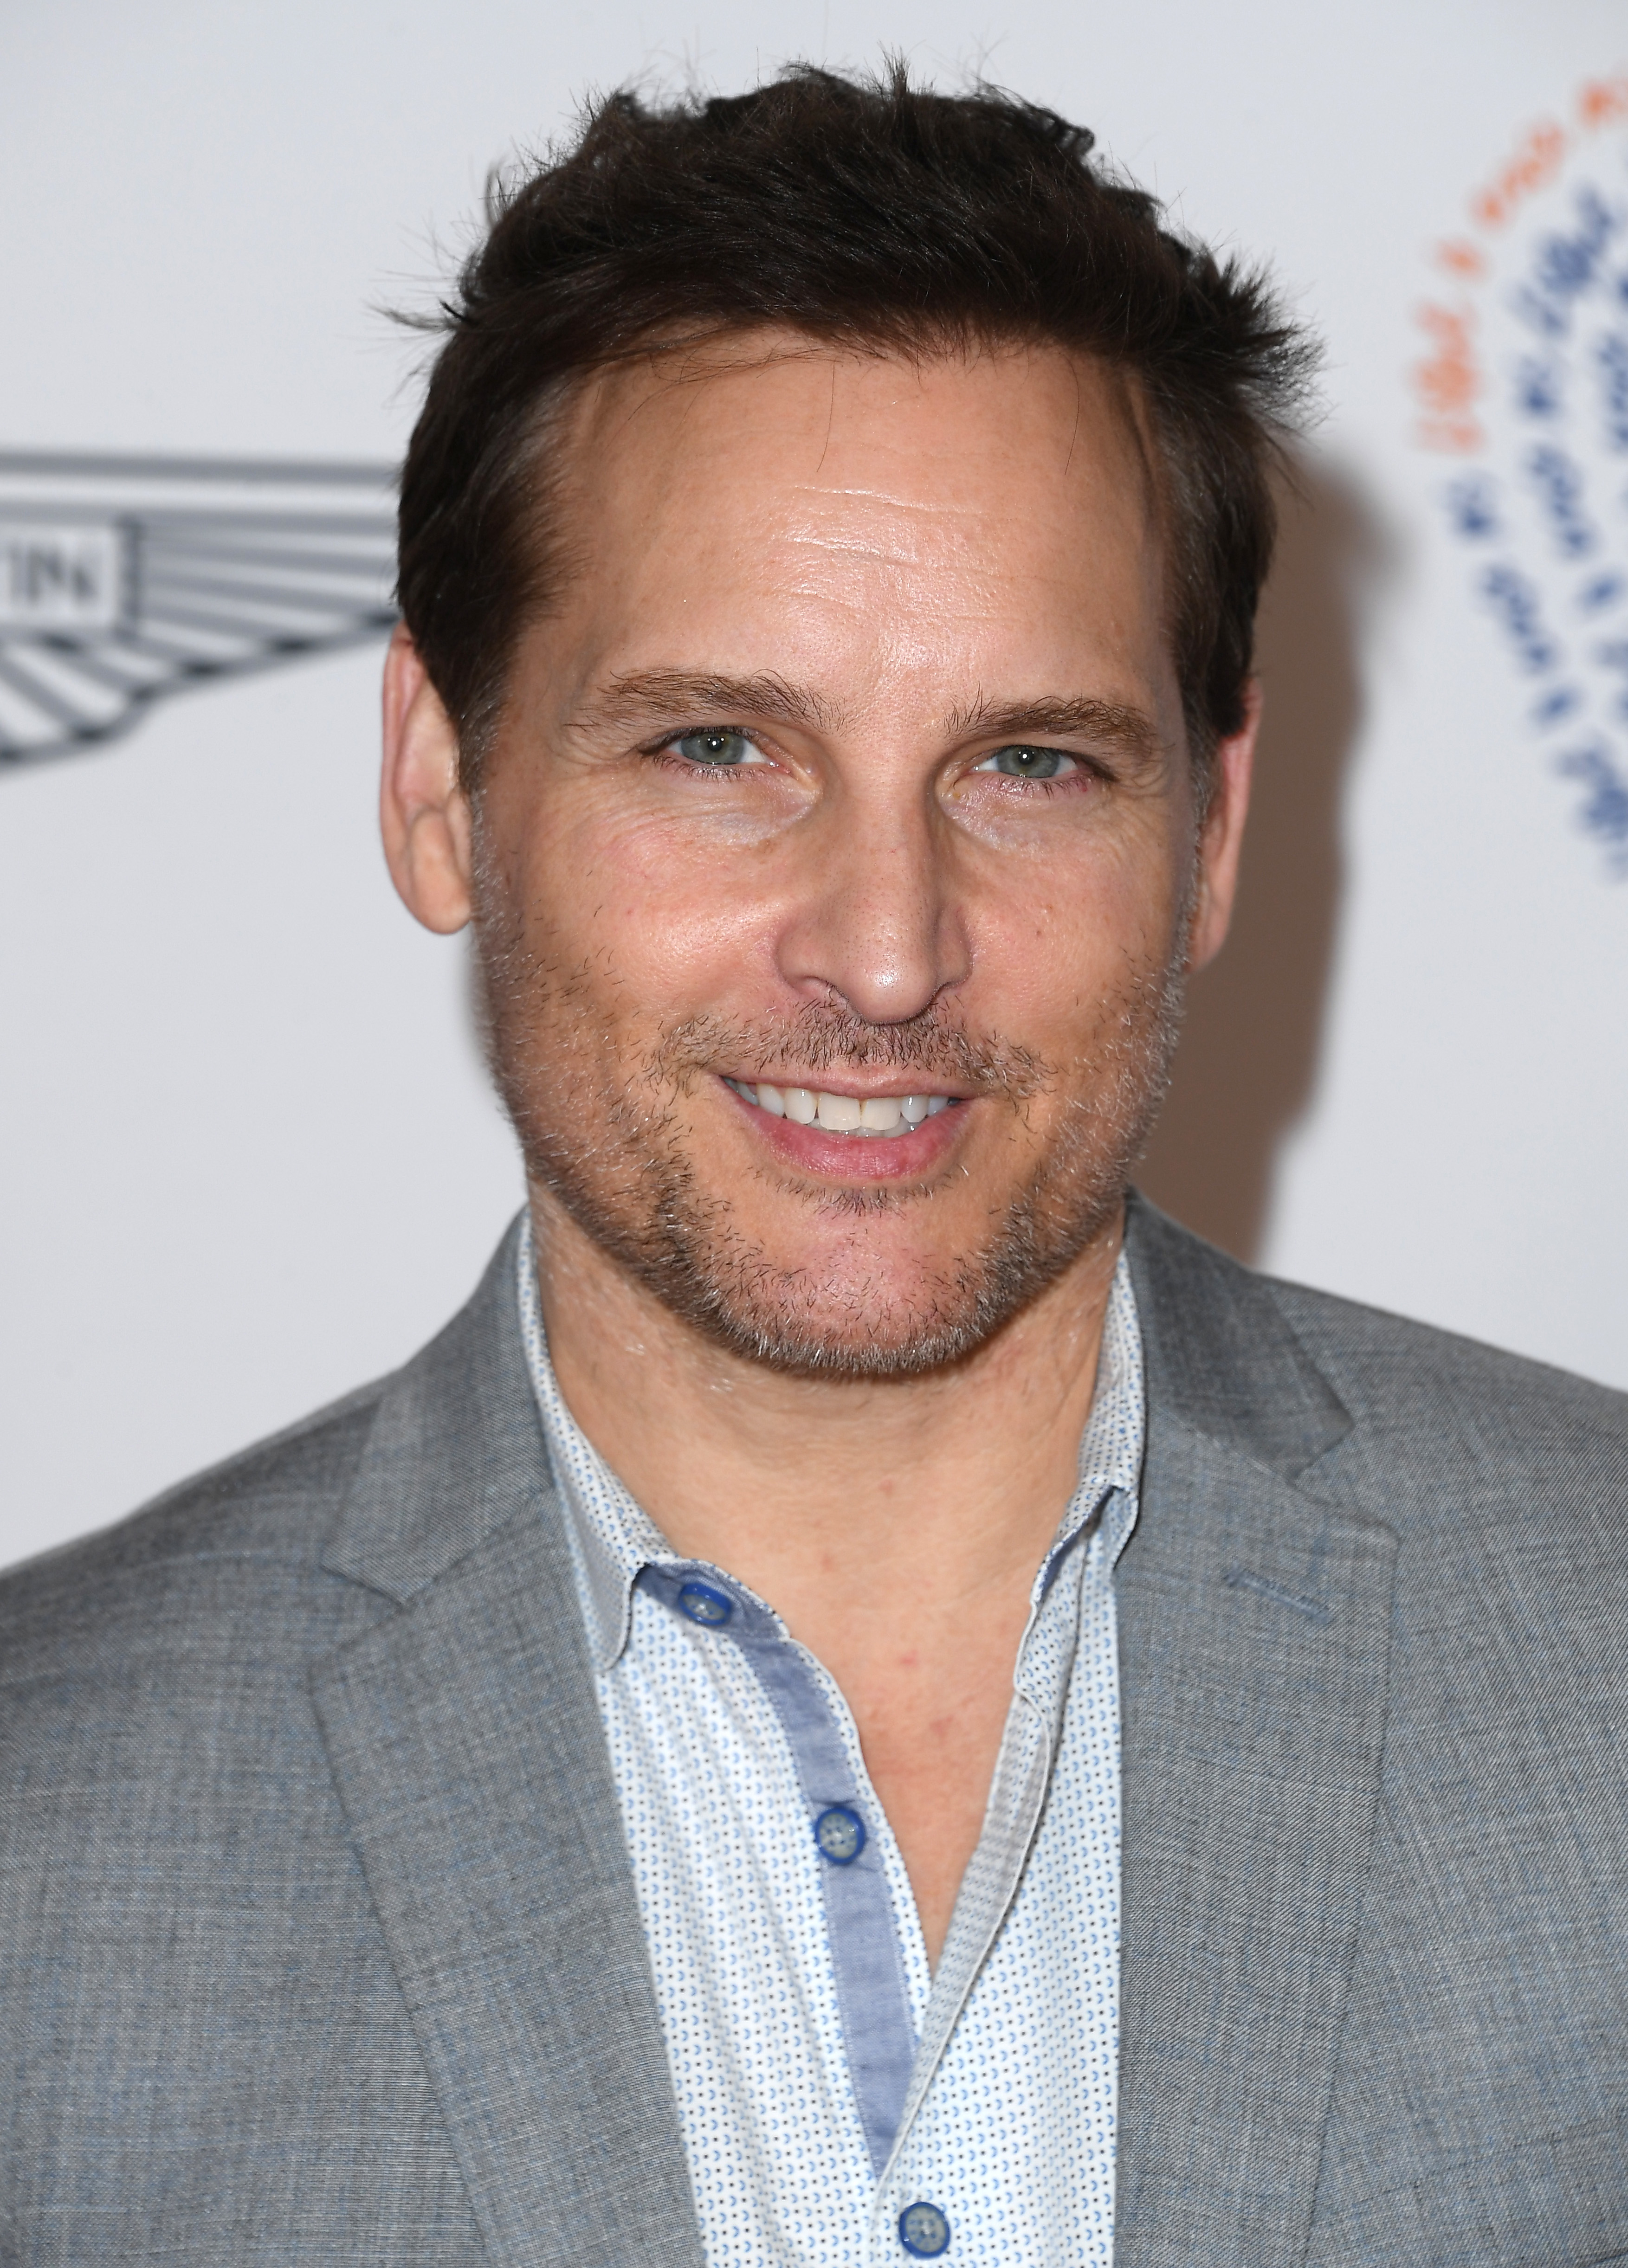 Peter Facinelli at a red carpet event, wearing a light grey blazer over a patterned shirt